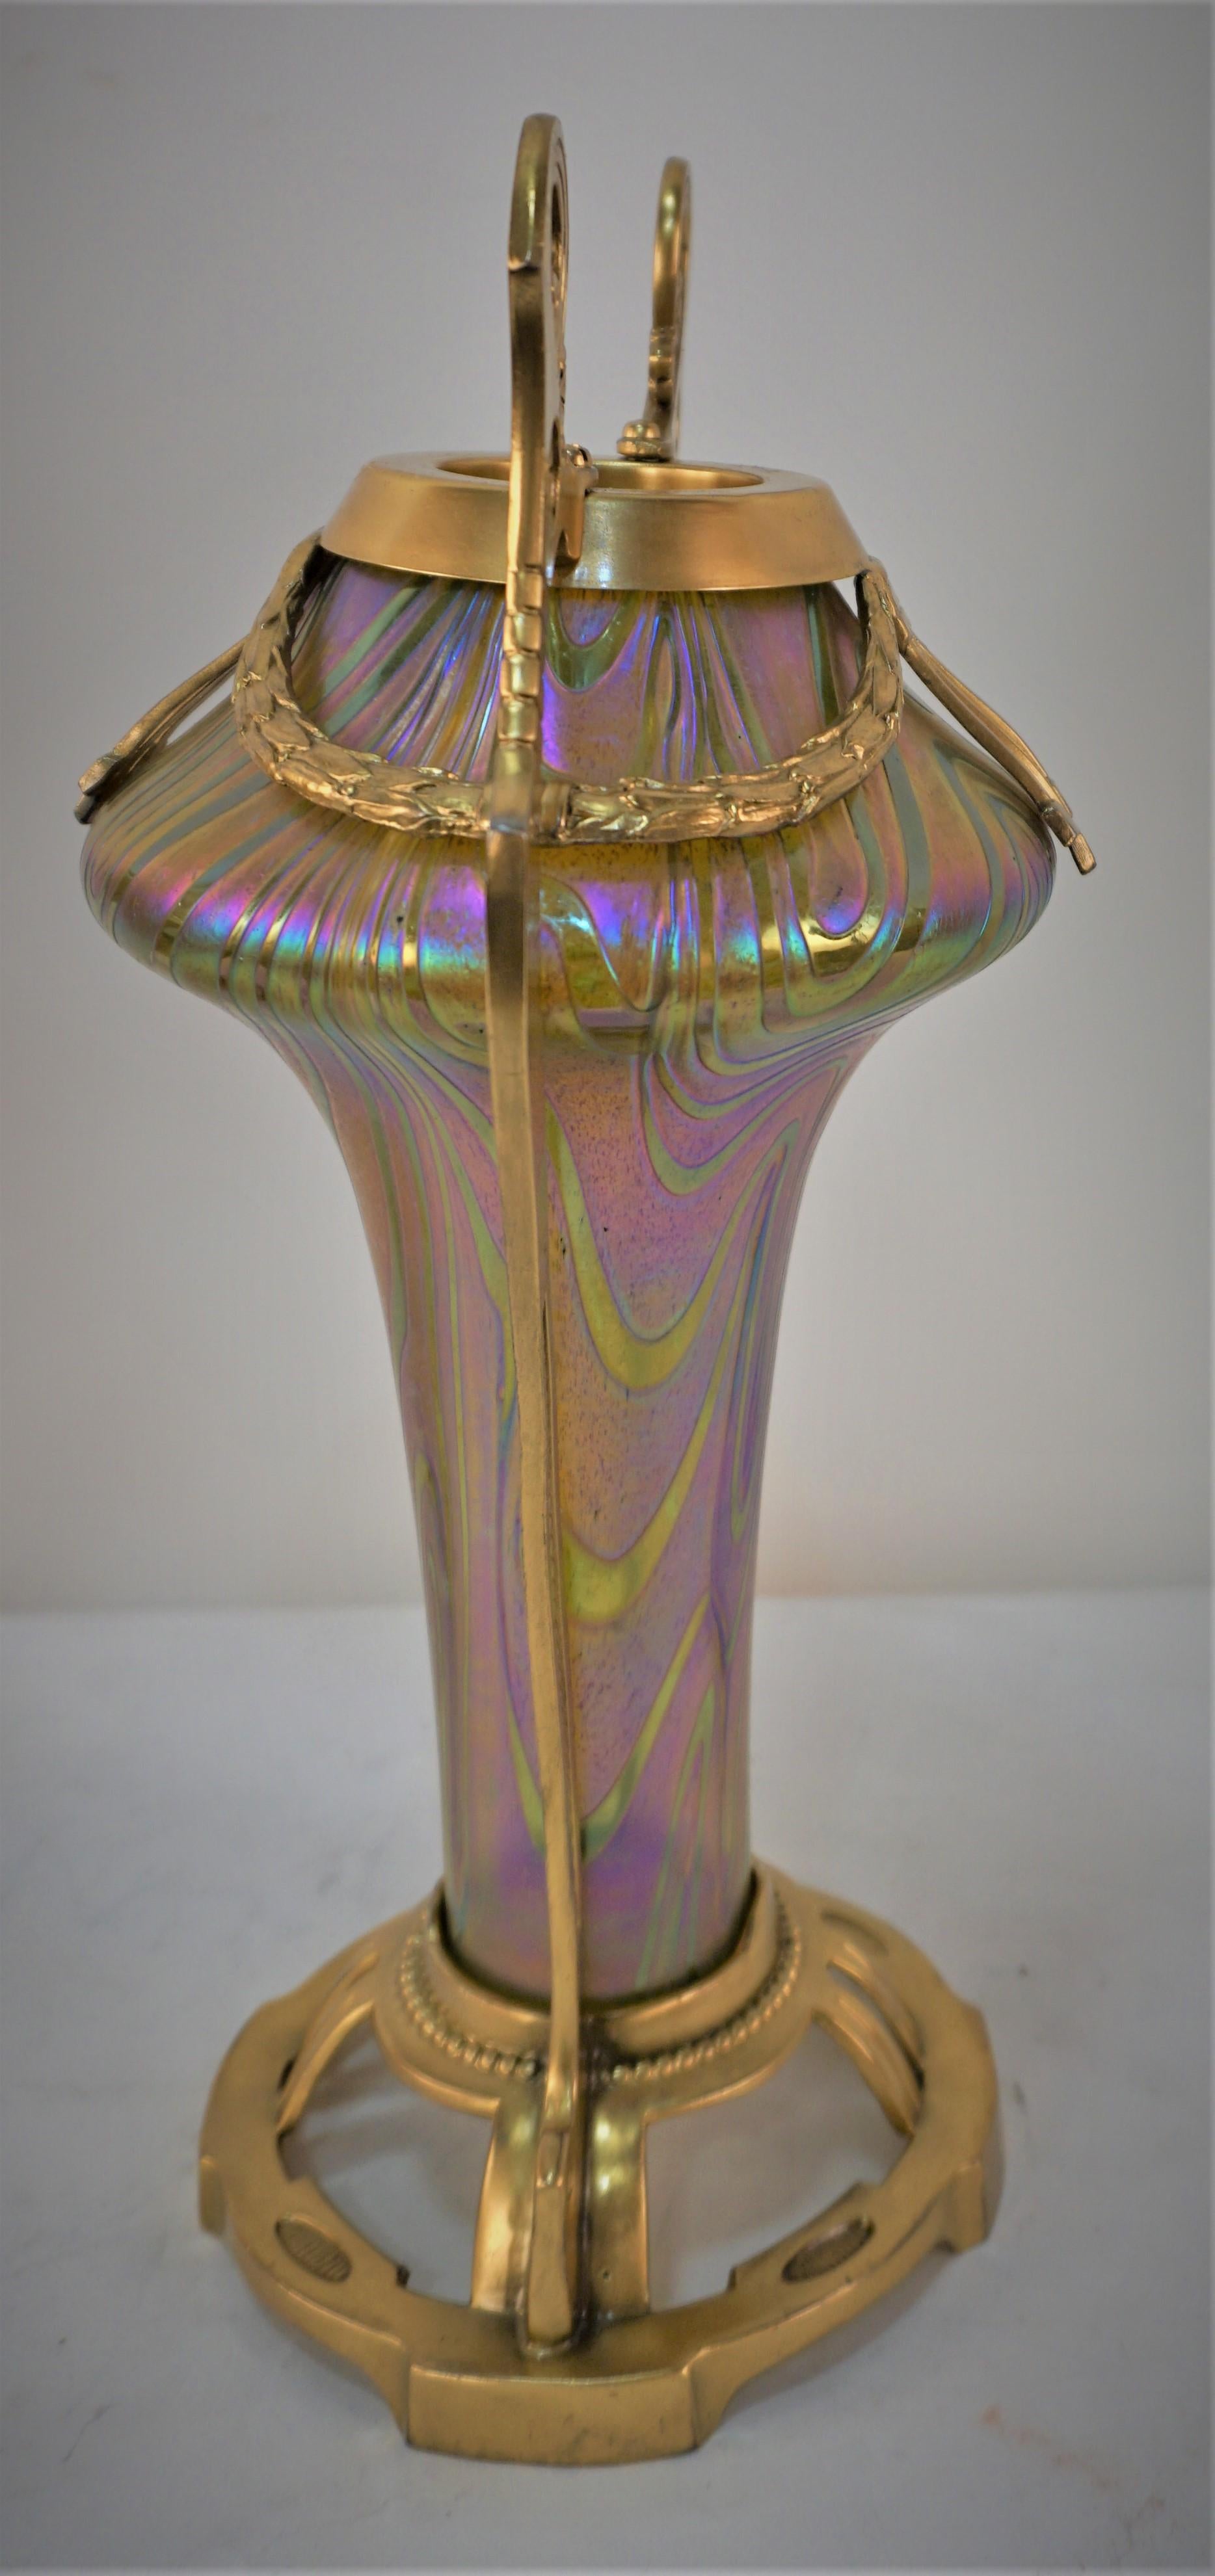 Pair Of Loetz Style Art Nouveau Iridescent Glass Vases with Dore Metal Mounting 1